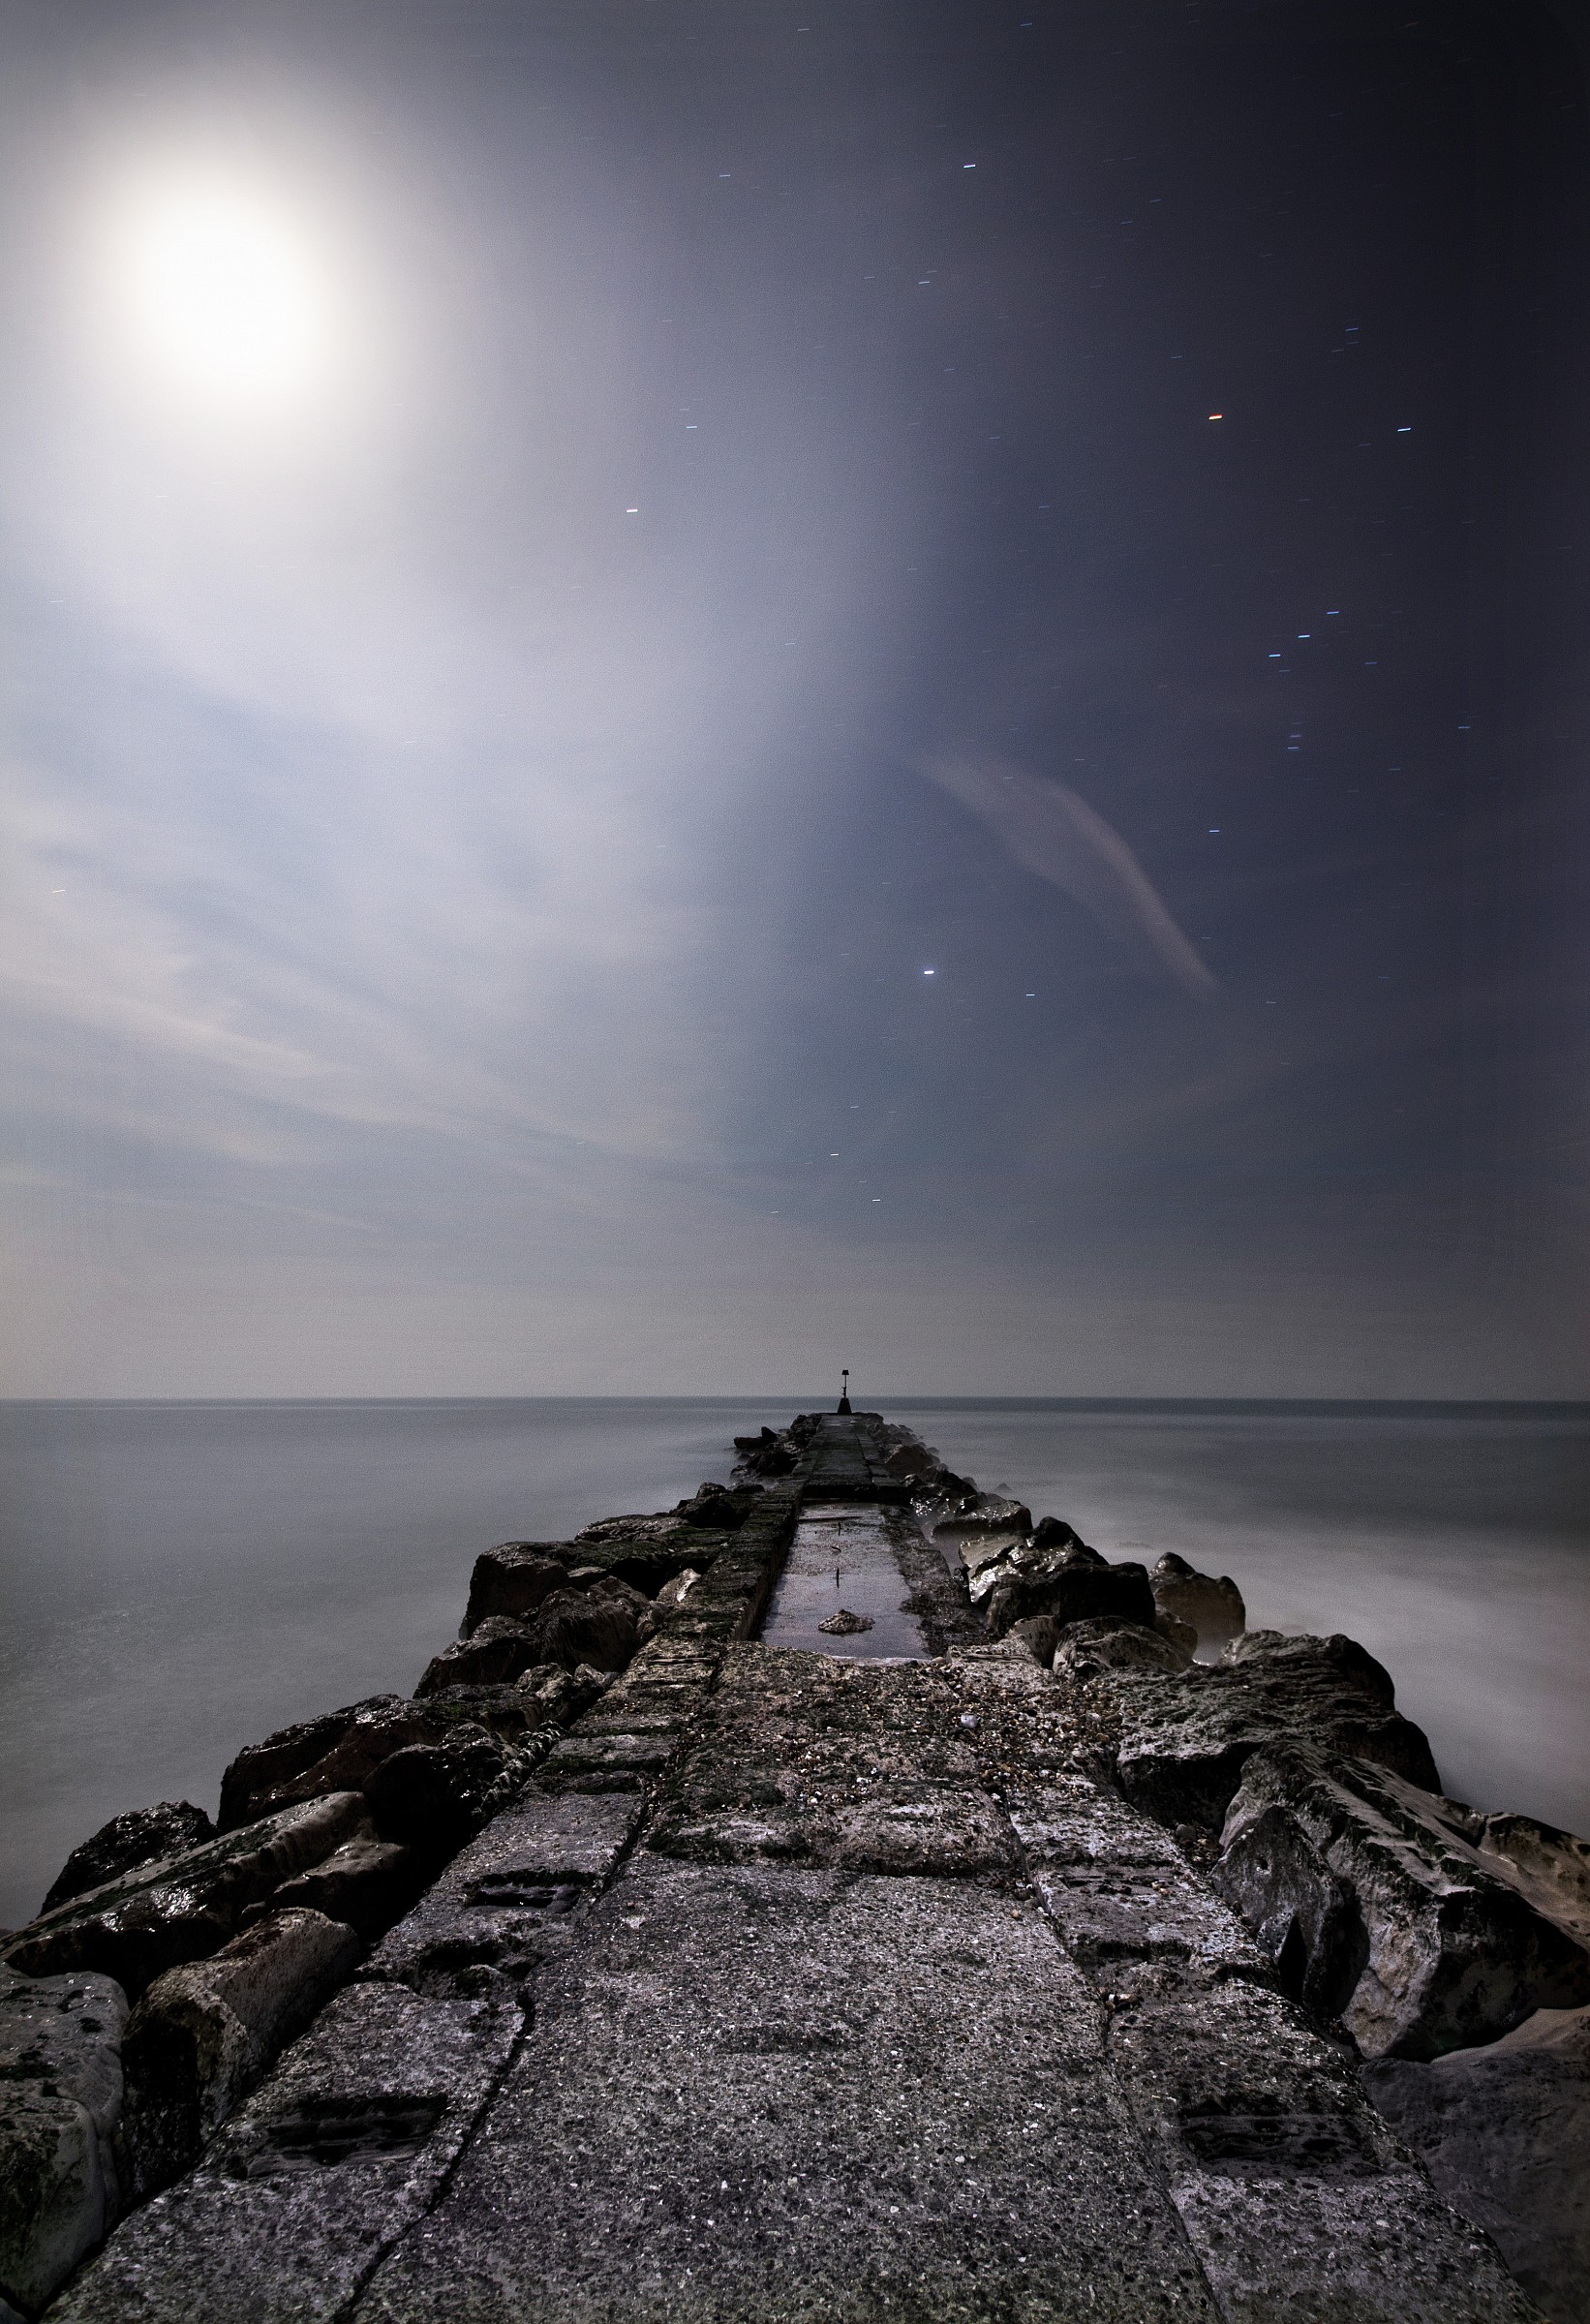 Soft Moonlight over the Jetty...